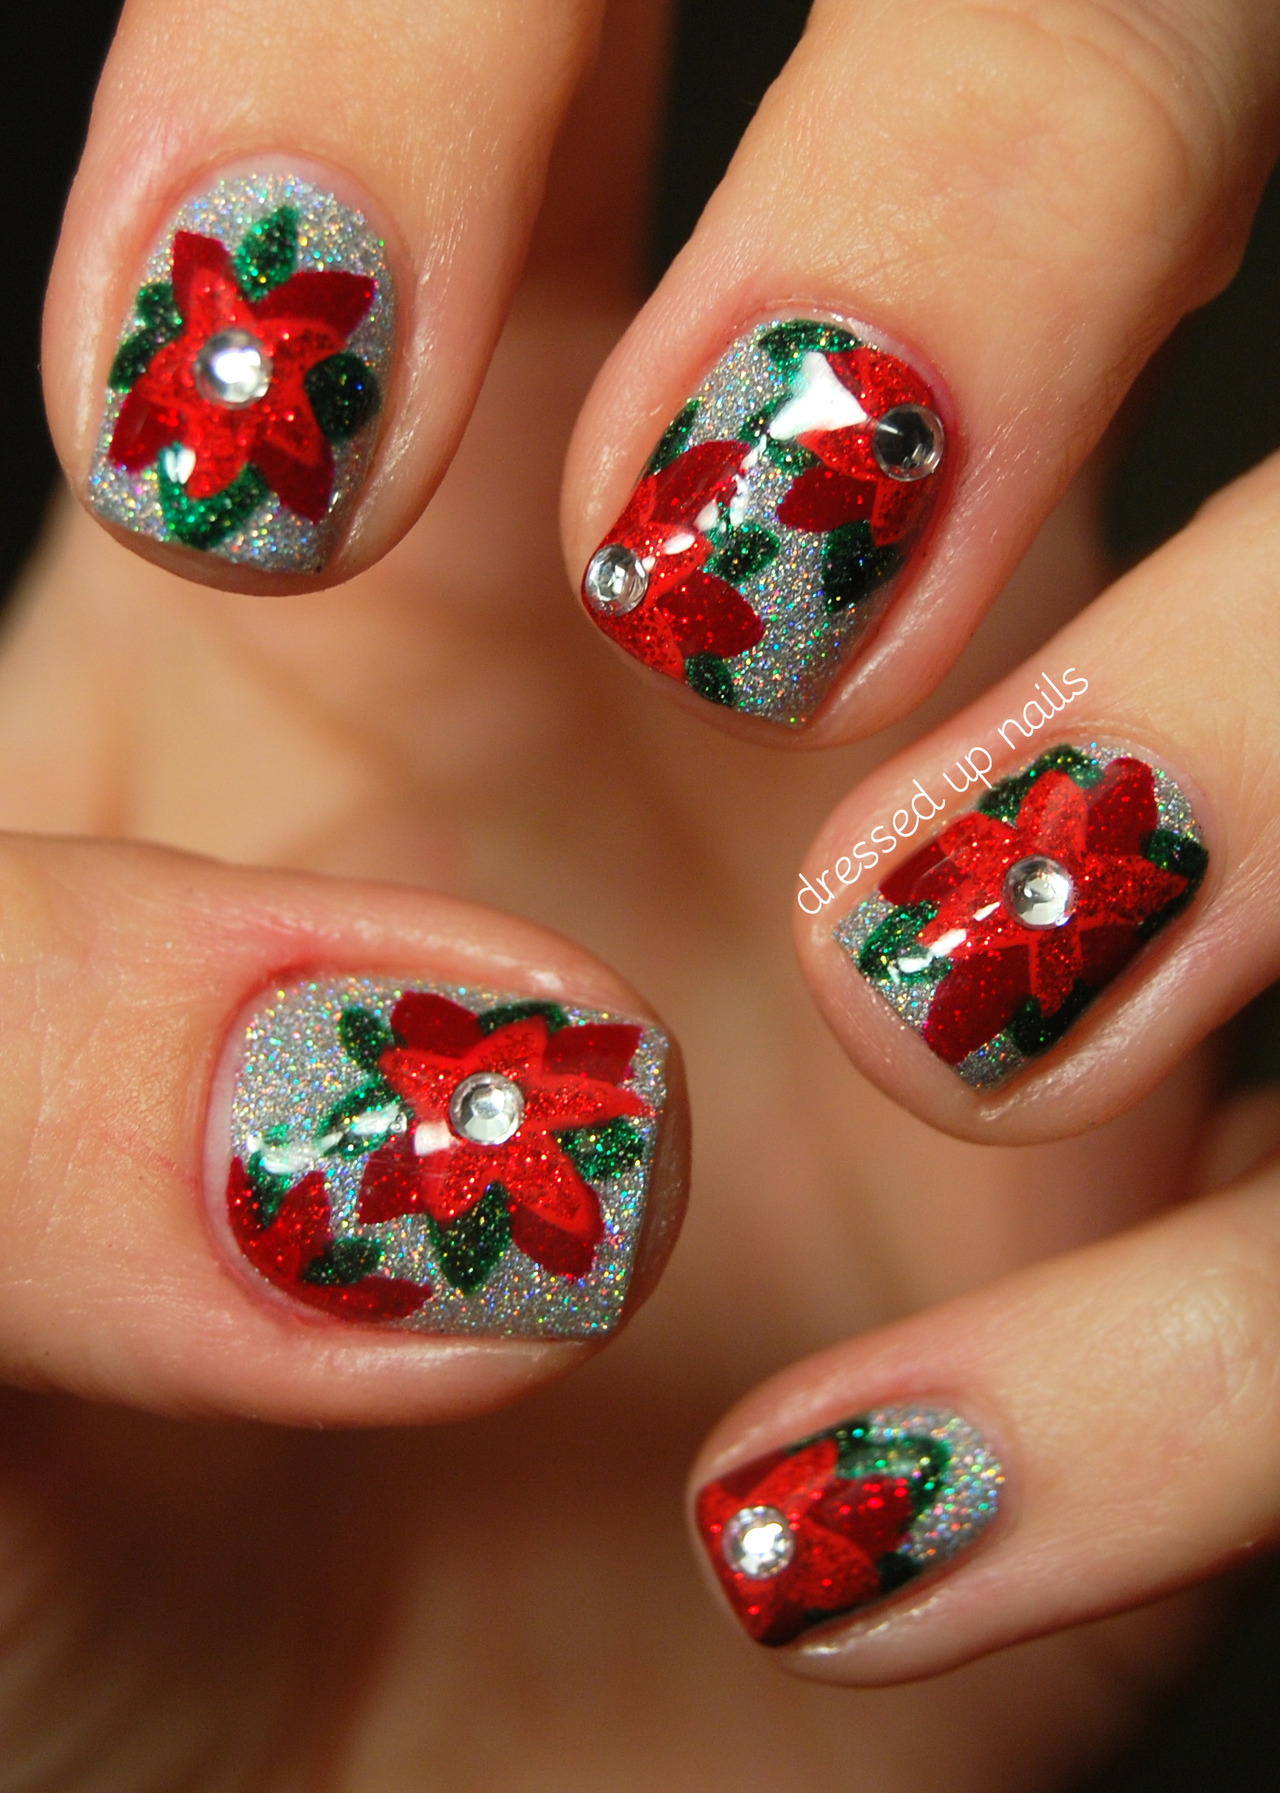 dressedupnails:

Today I have my first holiday nails to show y’all! I just joined a nail art group that posts a week’s worth of nails each month relating to a specific theme and this month’s theme is (of course) FESTIVENESS! So I hope y’all are ready for five sweet (and GLITTERY) holiday-themed manis this week cuz I’m super pumped to show you them. I did these glittery poinsettia nails a couple weeks ago and it’s been hard to wait to post them because I love them a lot… so much that I might re-do them for my actual Christmas nails. You can (AND SHOULD) go check out my blog post for more pictures and an explanation of how I did these!
P.S. GLITTER!!!
Facebook | Instagram @dressedupnails
